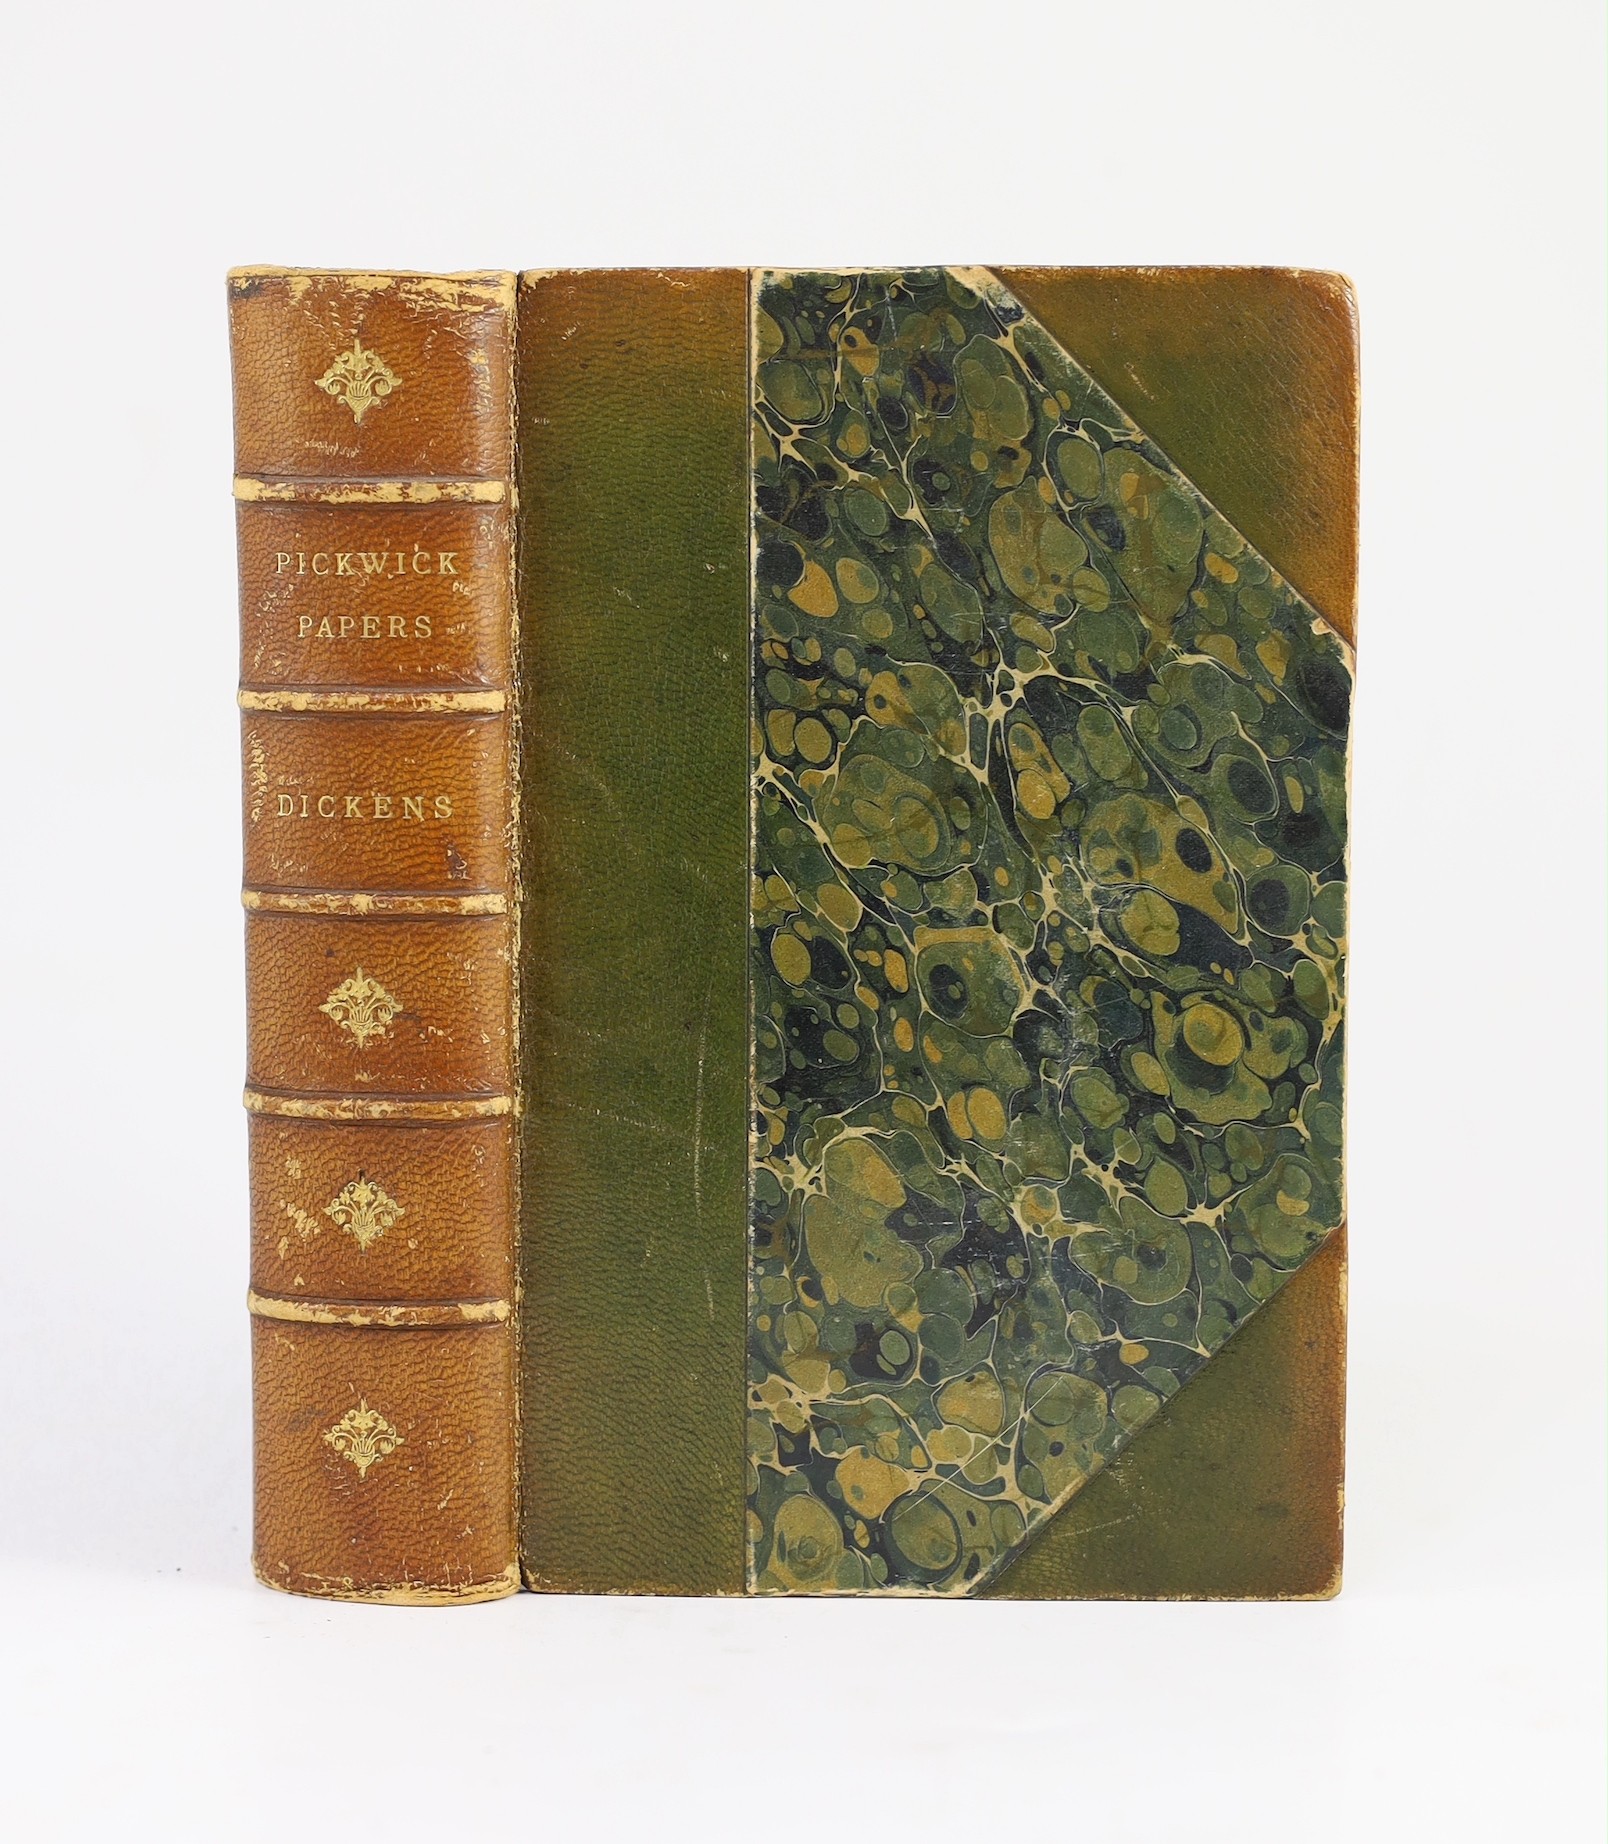 Dickens, Charles - The Posthumous Papers of the Pickwick Club. ‘’Pickwick Papers’’, 1st edition in book form, with mixed 1st state points, stab holes present, 8vo, half calf with marbled boards by Rivière & Son, with fro